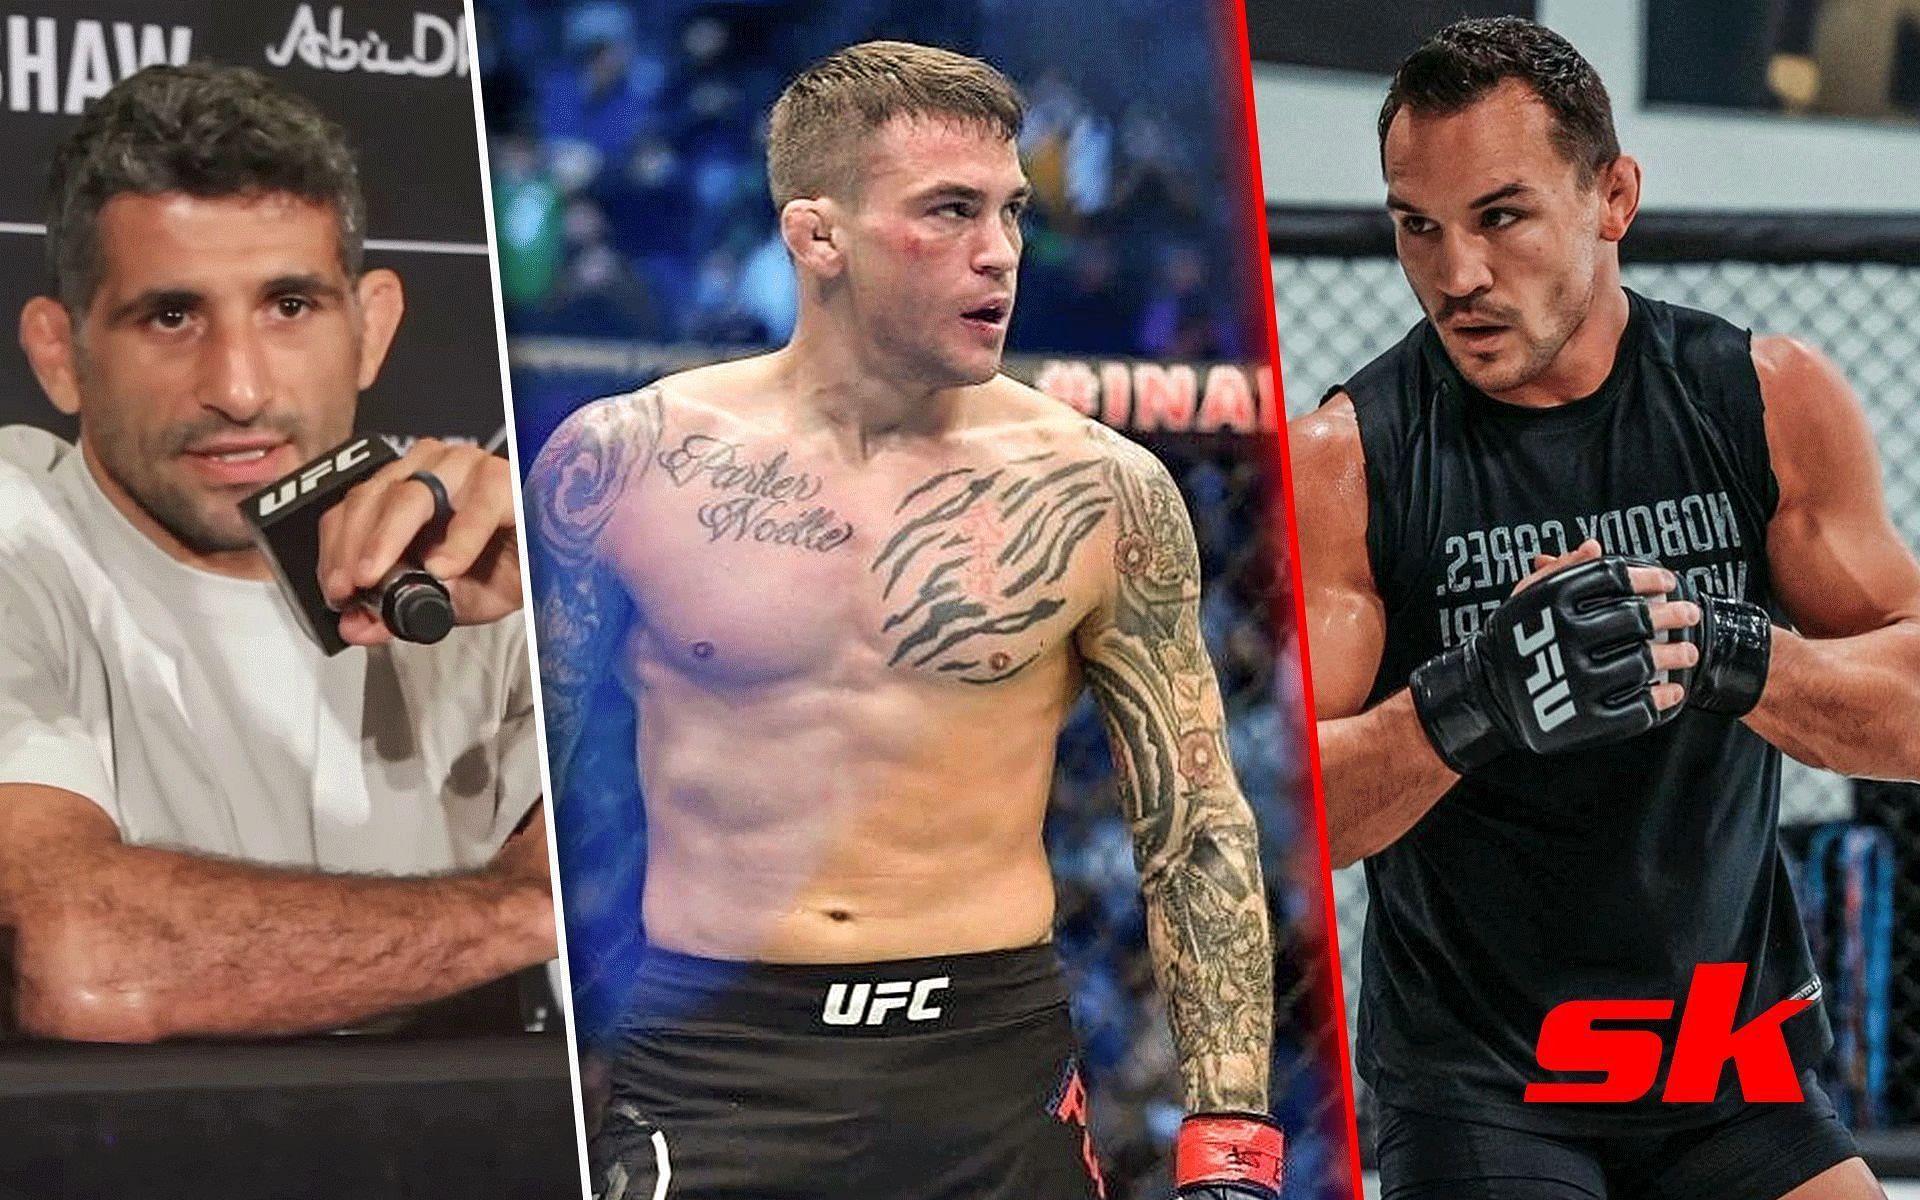 Beneil Dariush (left), Dustin Poirier (center), Michael Chandler (right) [Photo credit: @TheMacLife on YouTube, @dustinpoirier and @mikechandlermma on Instagram]